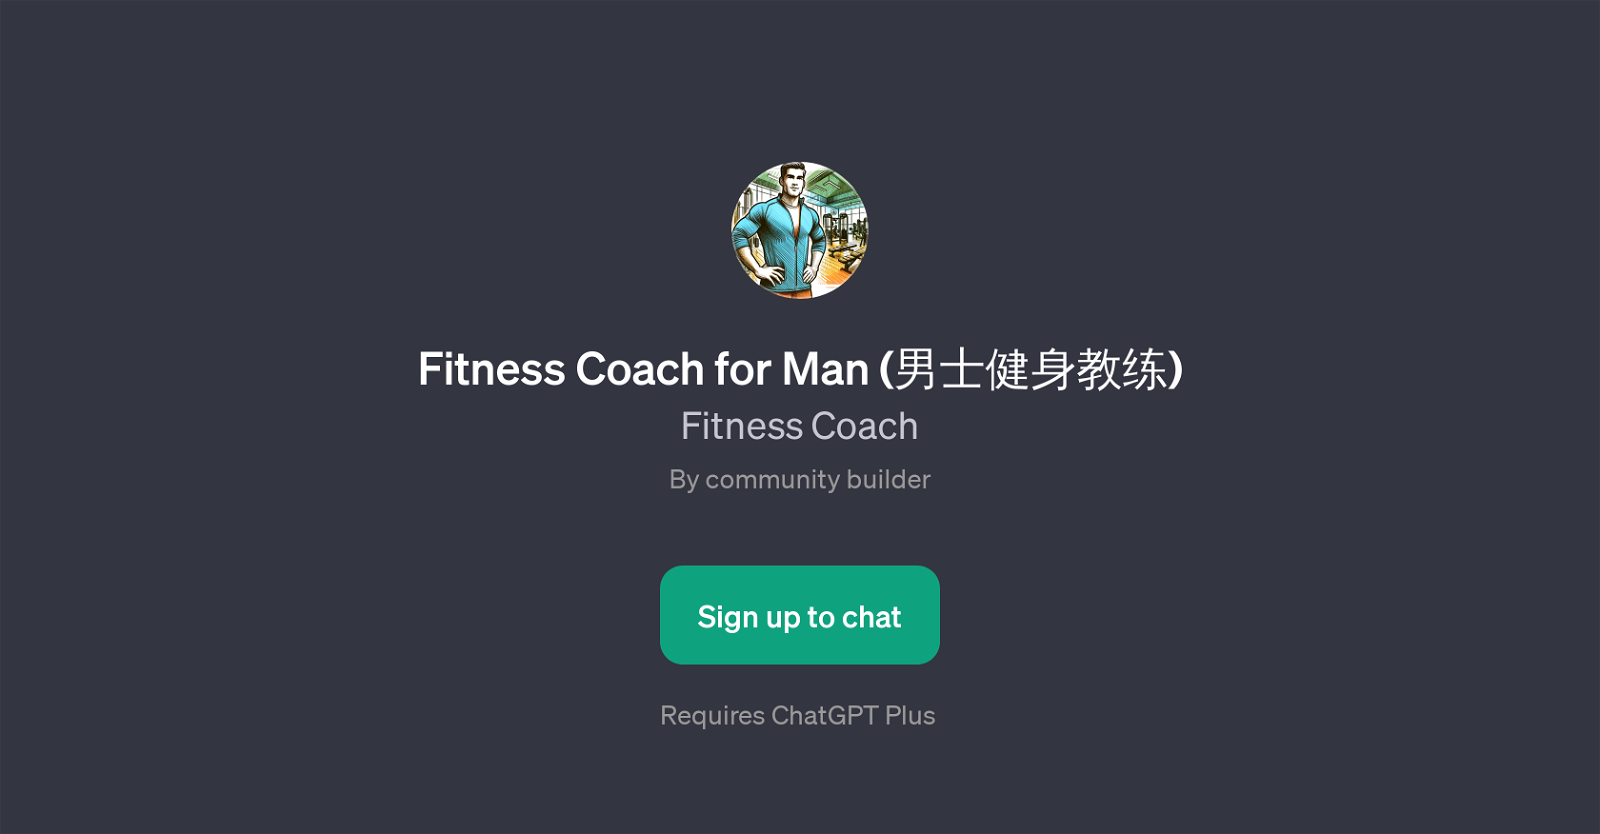 Fitness Coach for Man () website